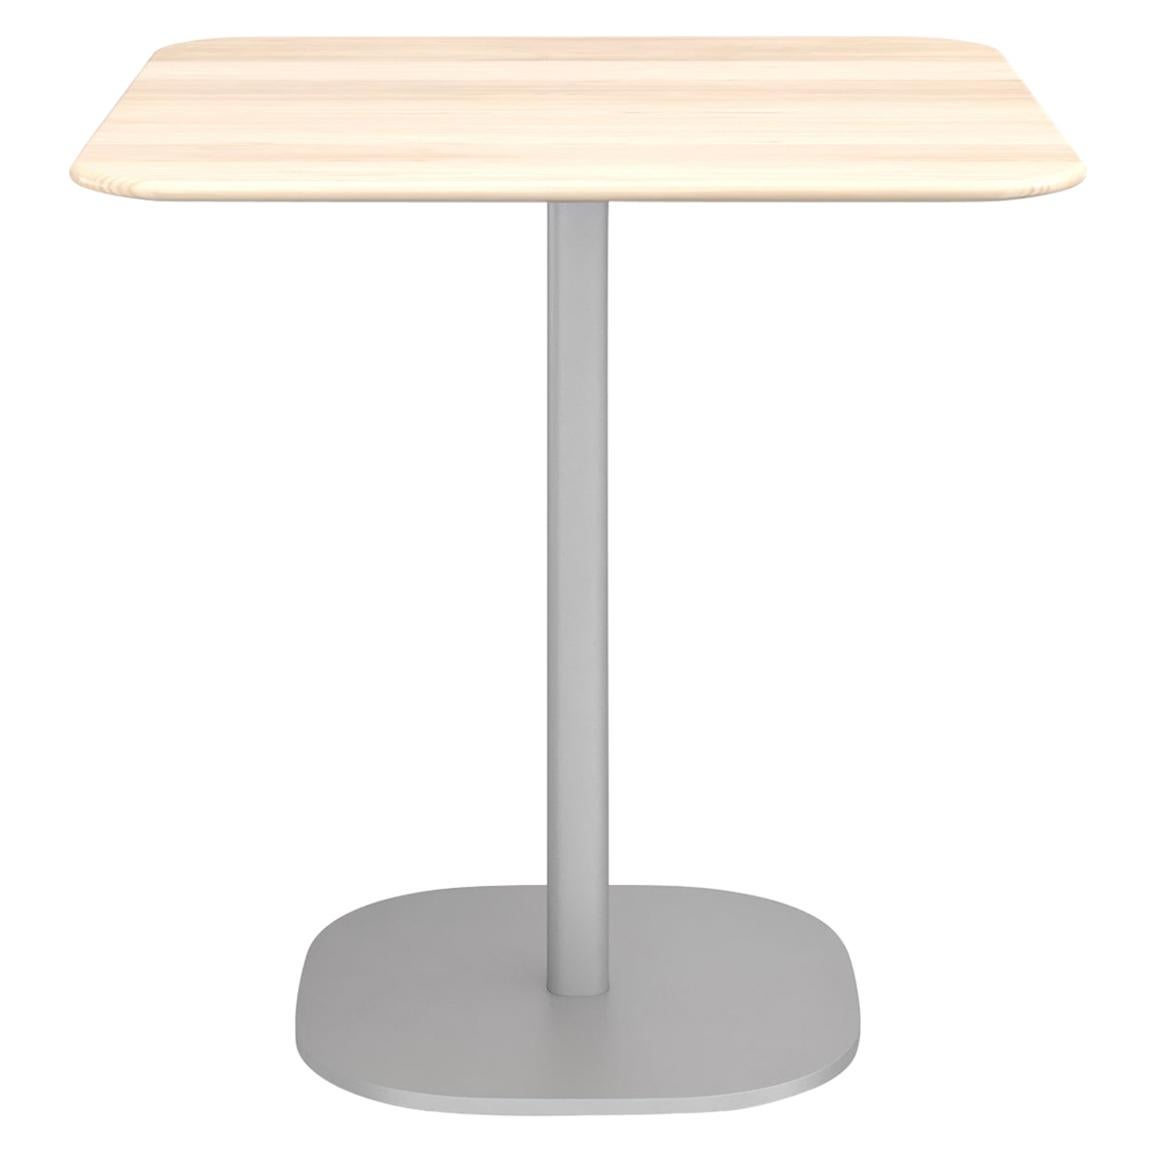 Emeco 2 Inch Large Cafe Table with Aluminum Legs & Wood Top by Jasper Morrison